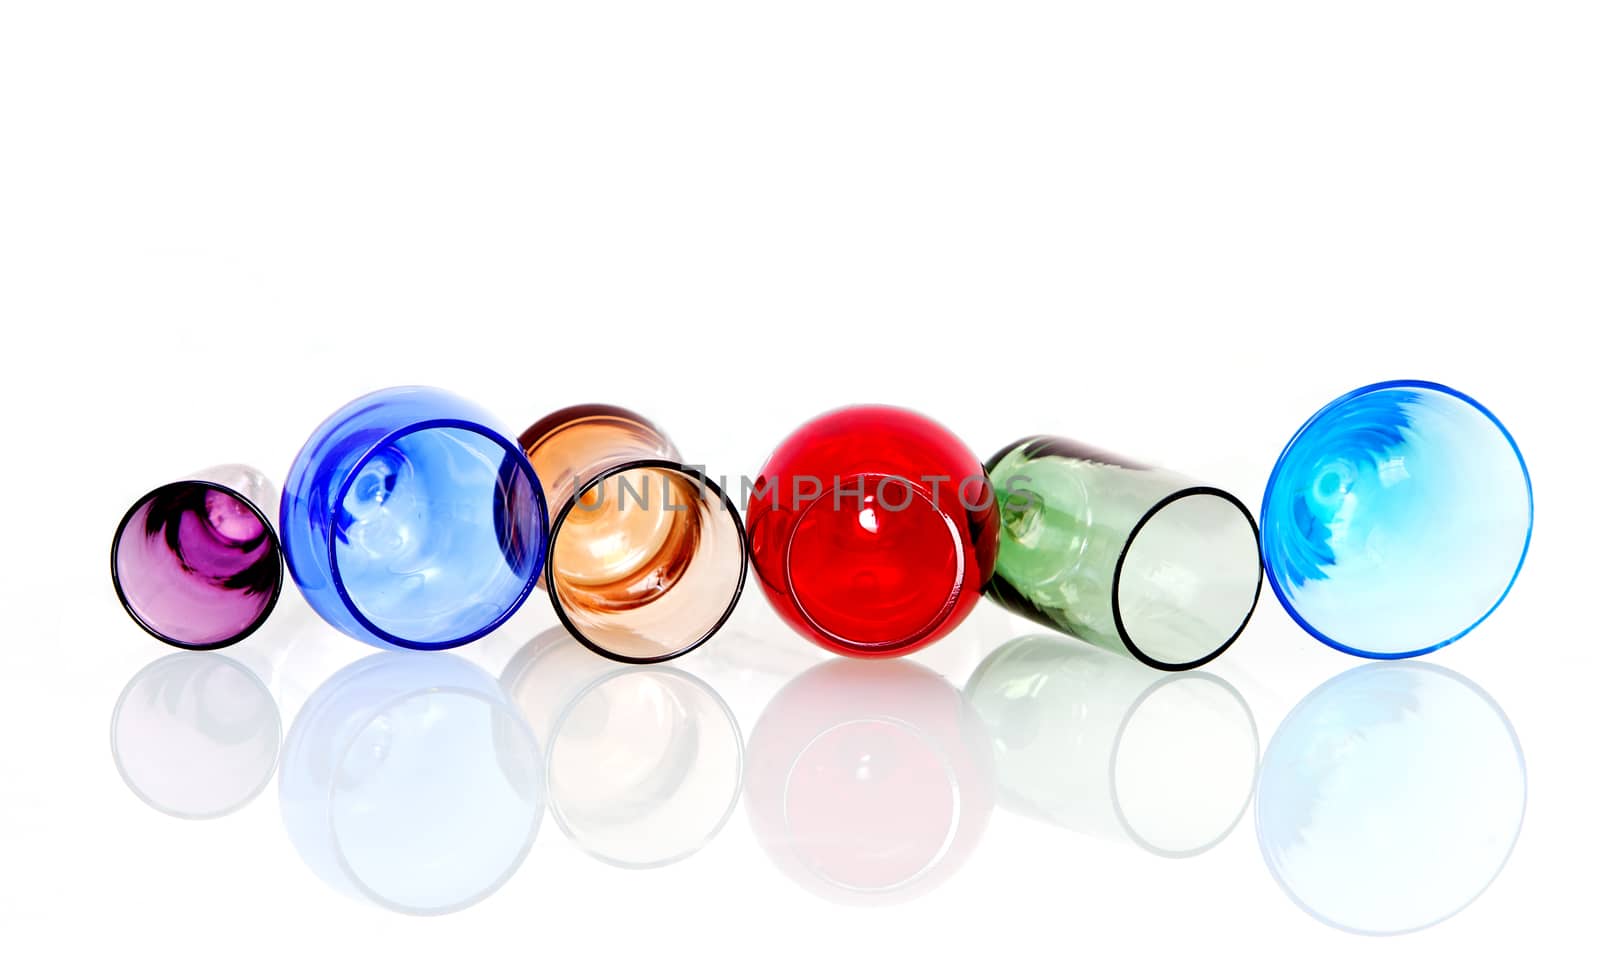 Abstract image of colored circles with crystal glasses and reflection on white background